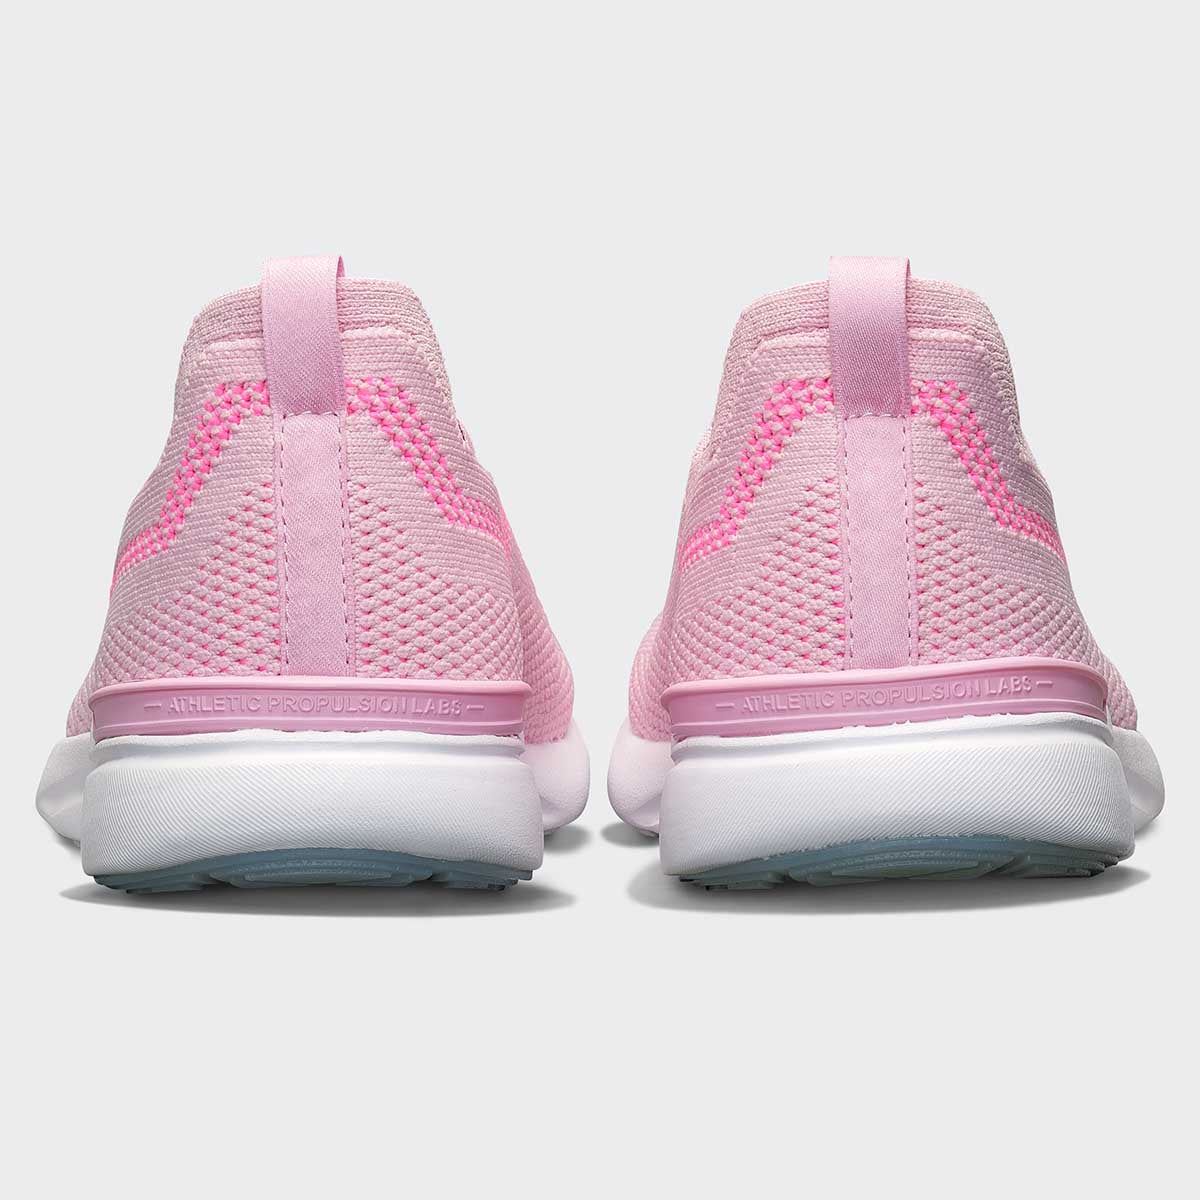 Women's TechLoom Breeze Soft Pink / Fusion Pink / White